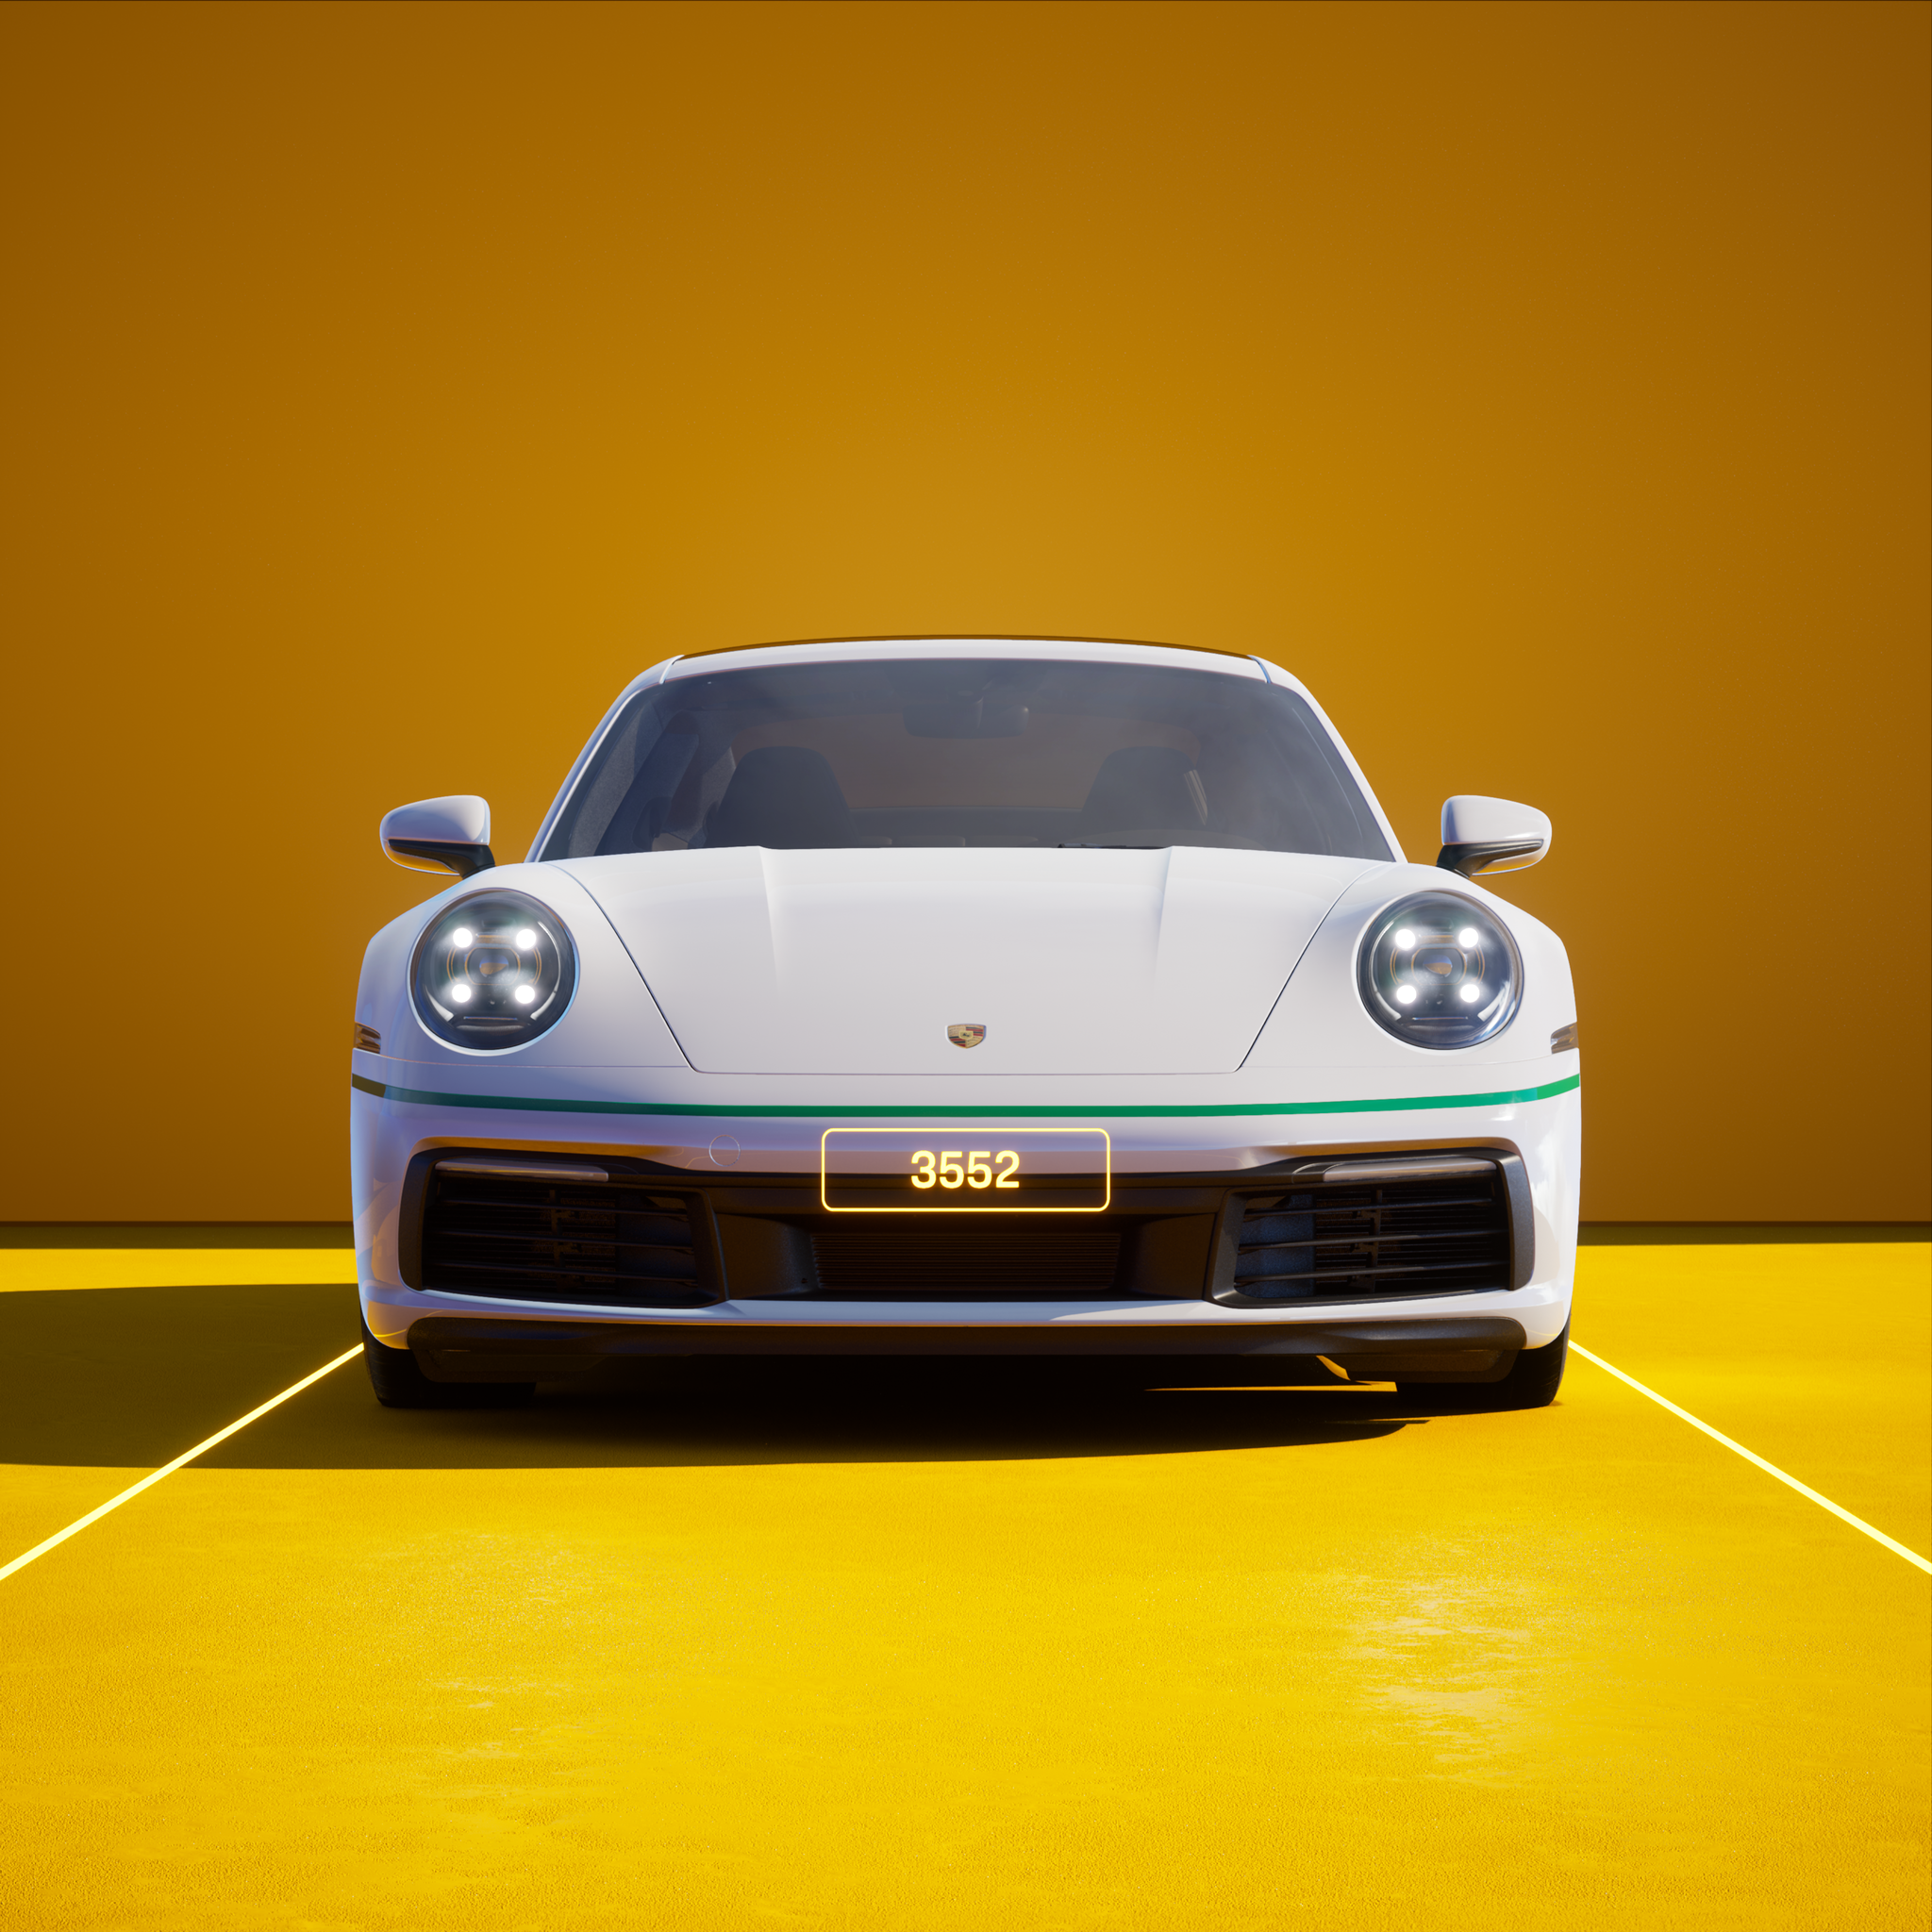 The PORSCHΞ 911 3552 image in phase